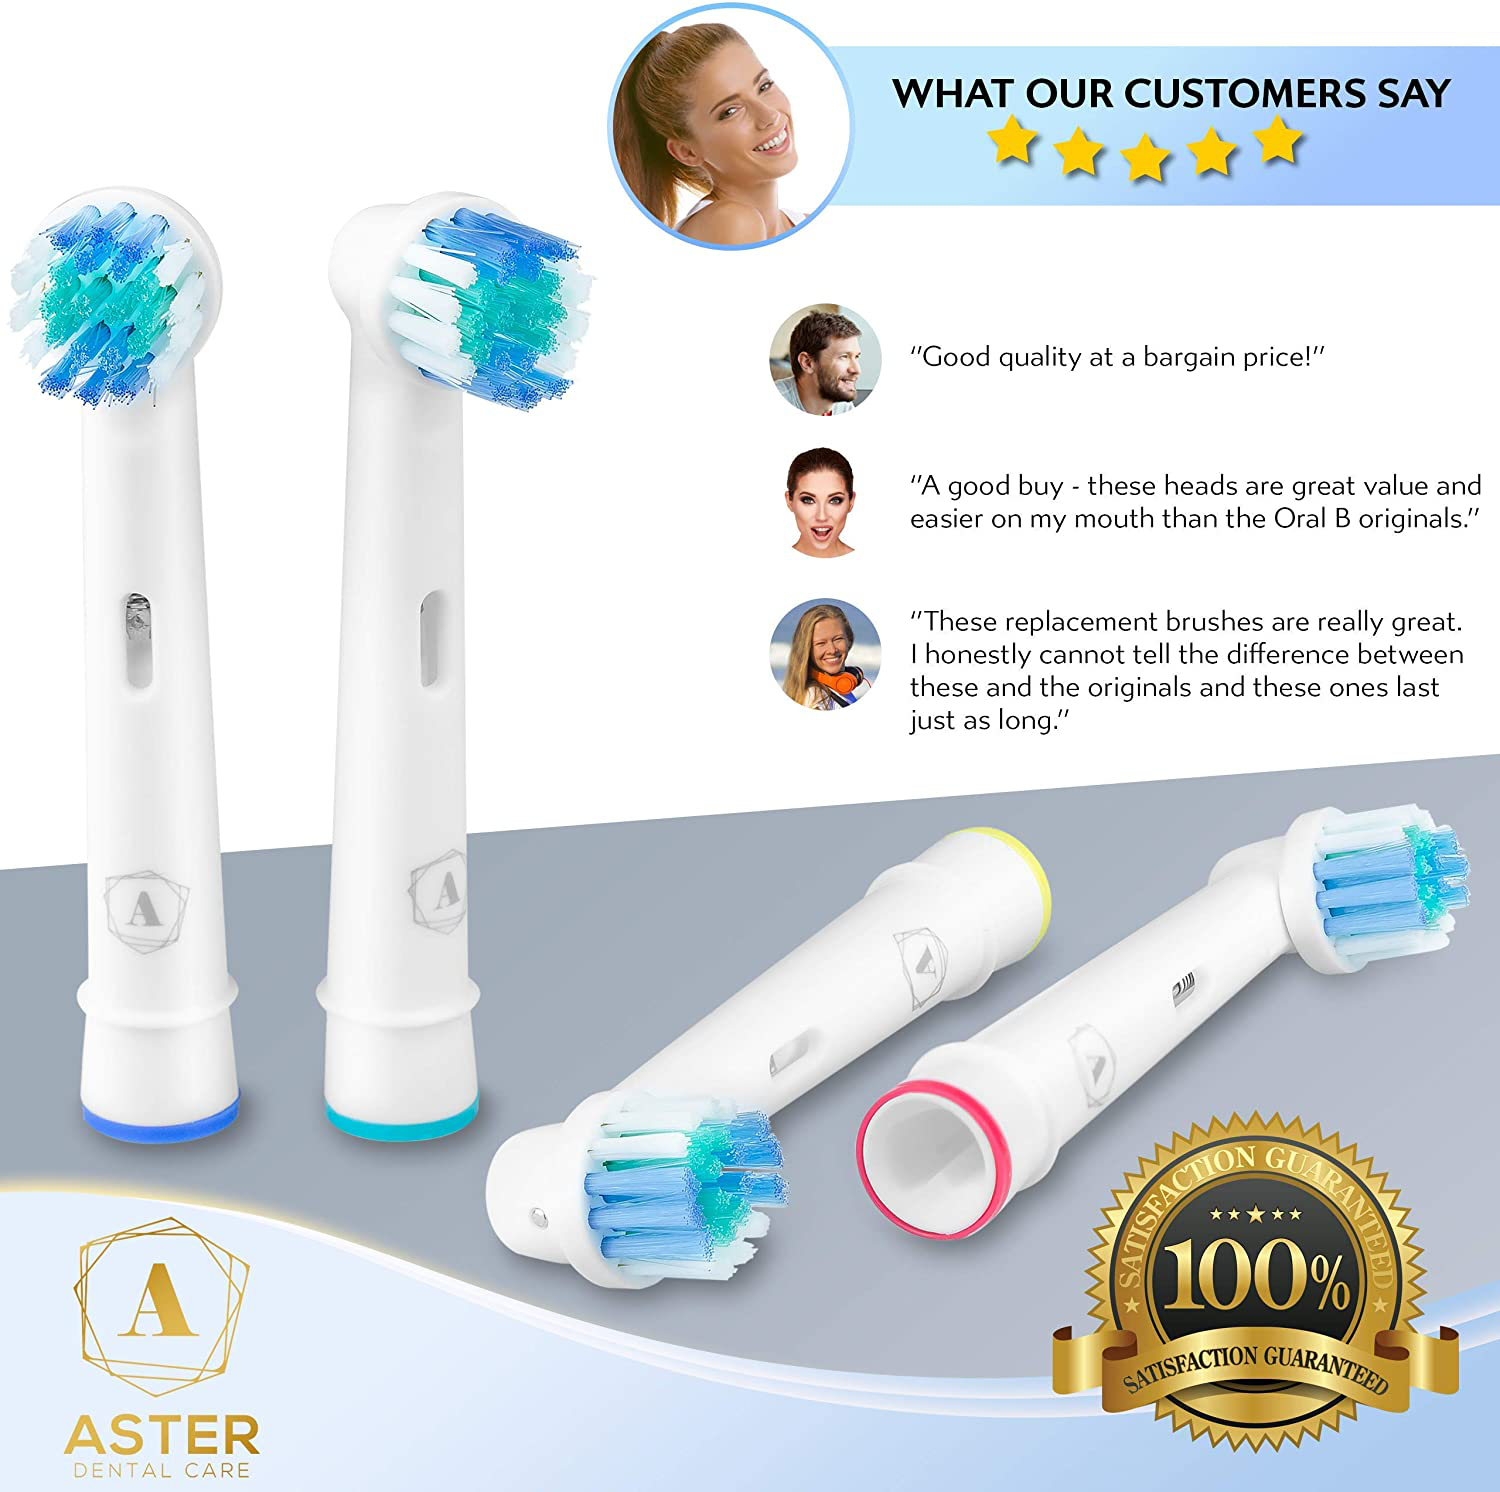 Aster Electric Toothbrush Replacement Heads 16 Pack / Compatible Oral B Braun Replacement Brush Heads / Oral B Replacement Brush Heads